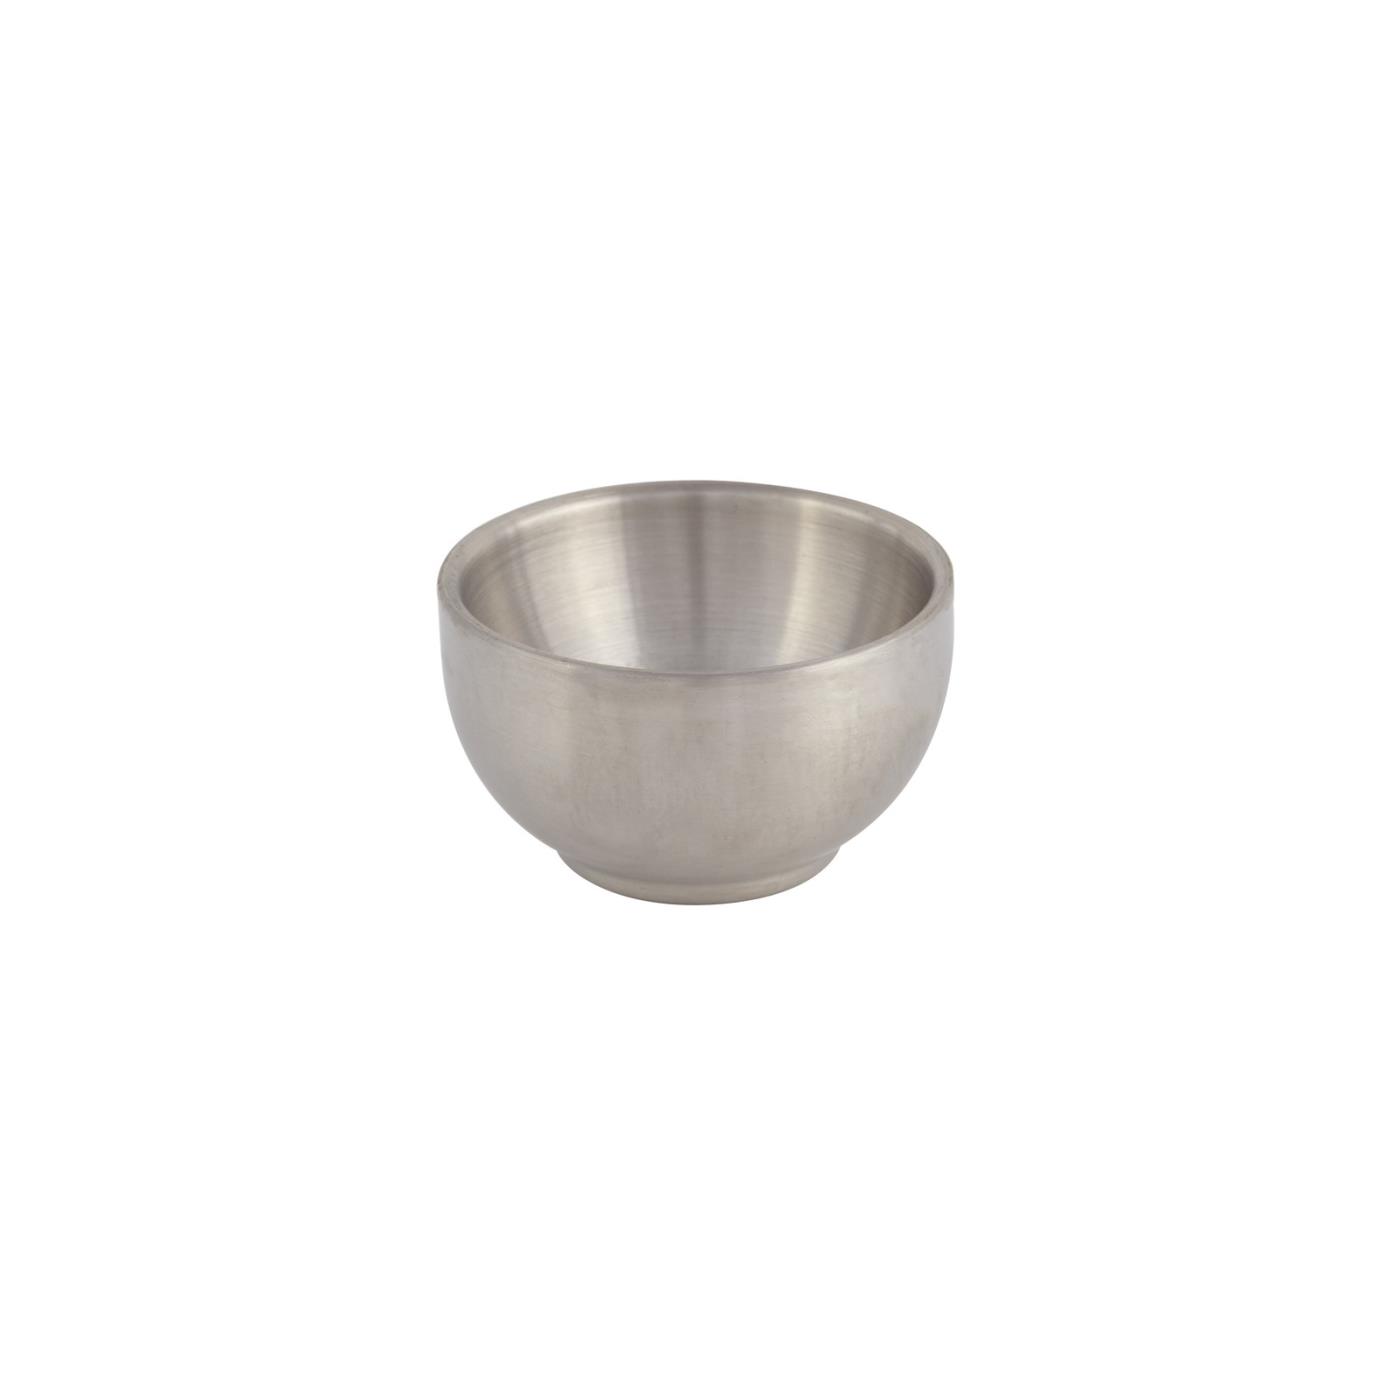 Stainless Steel Harmony Bowl - 2.5"